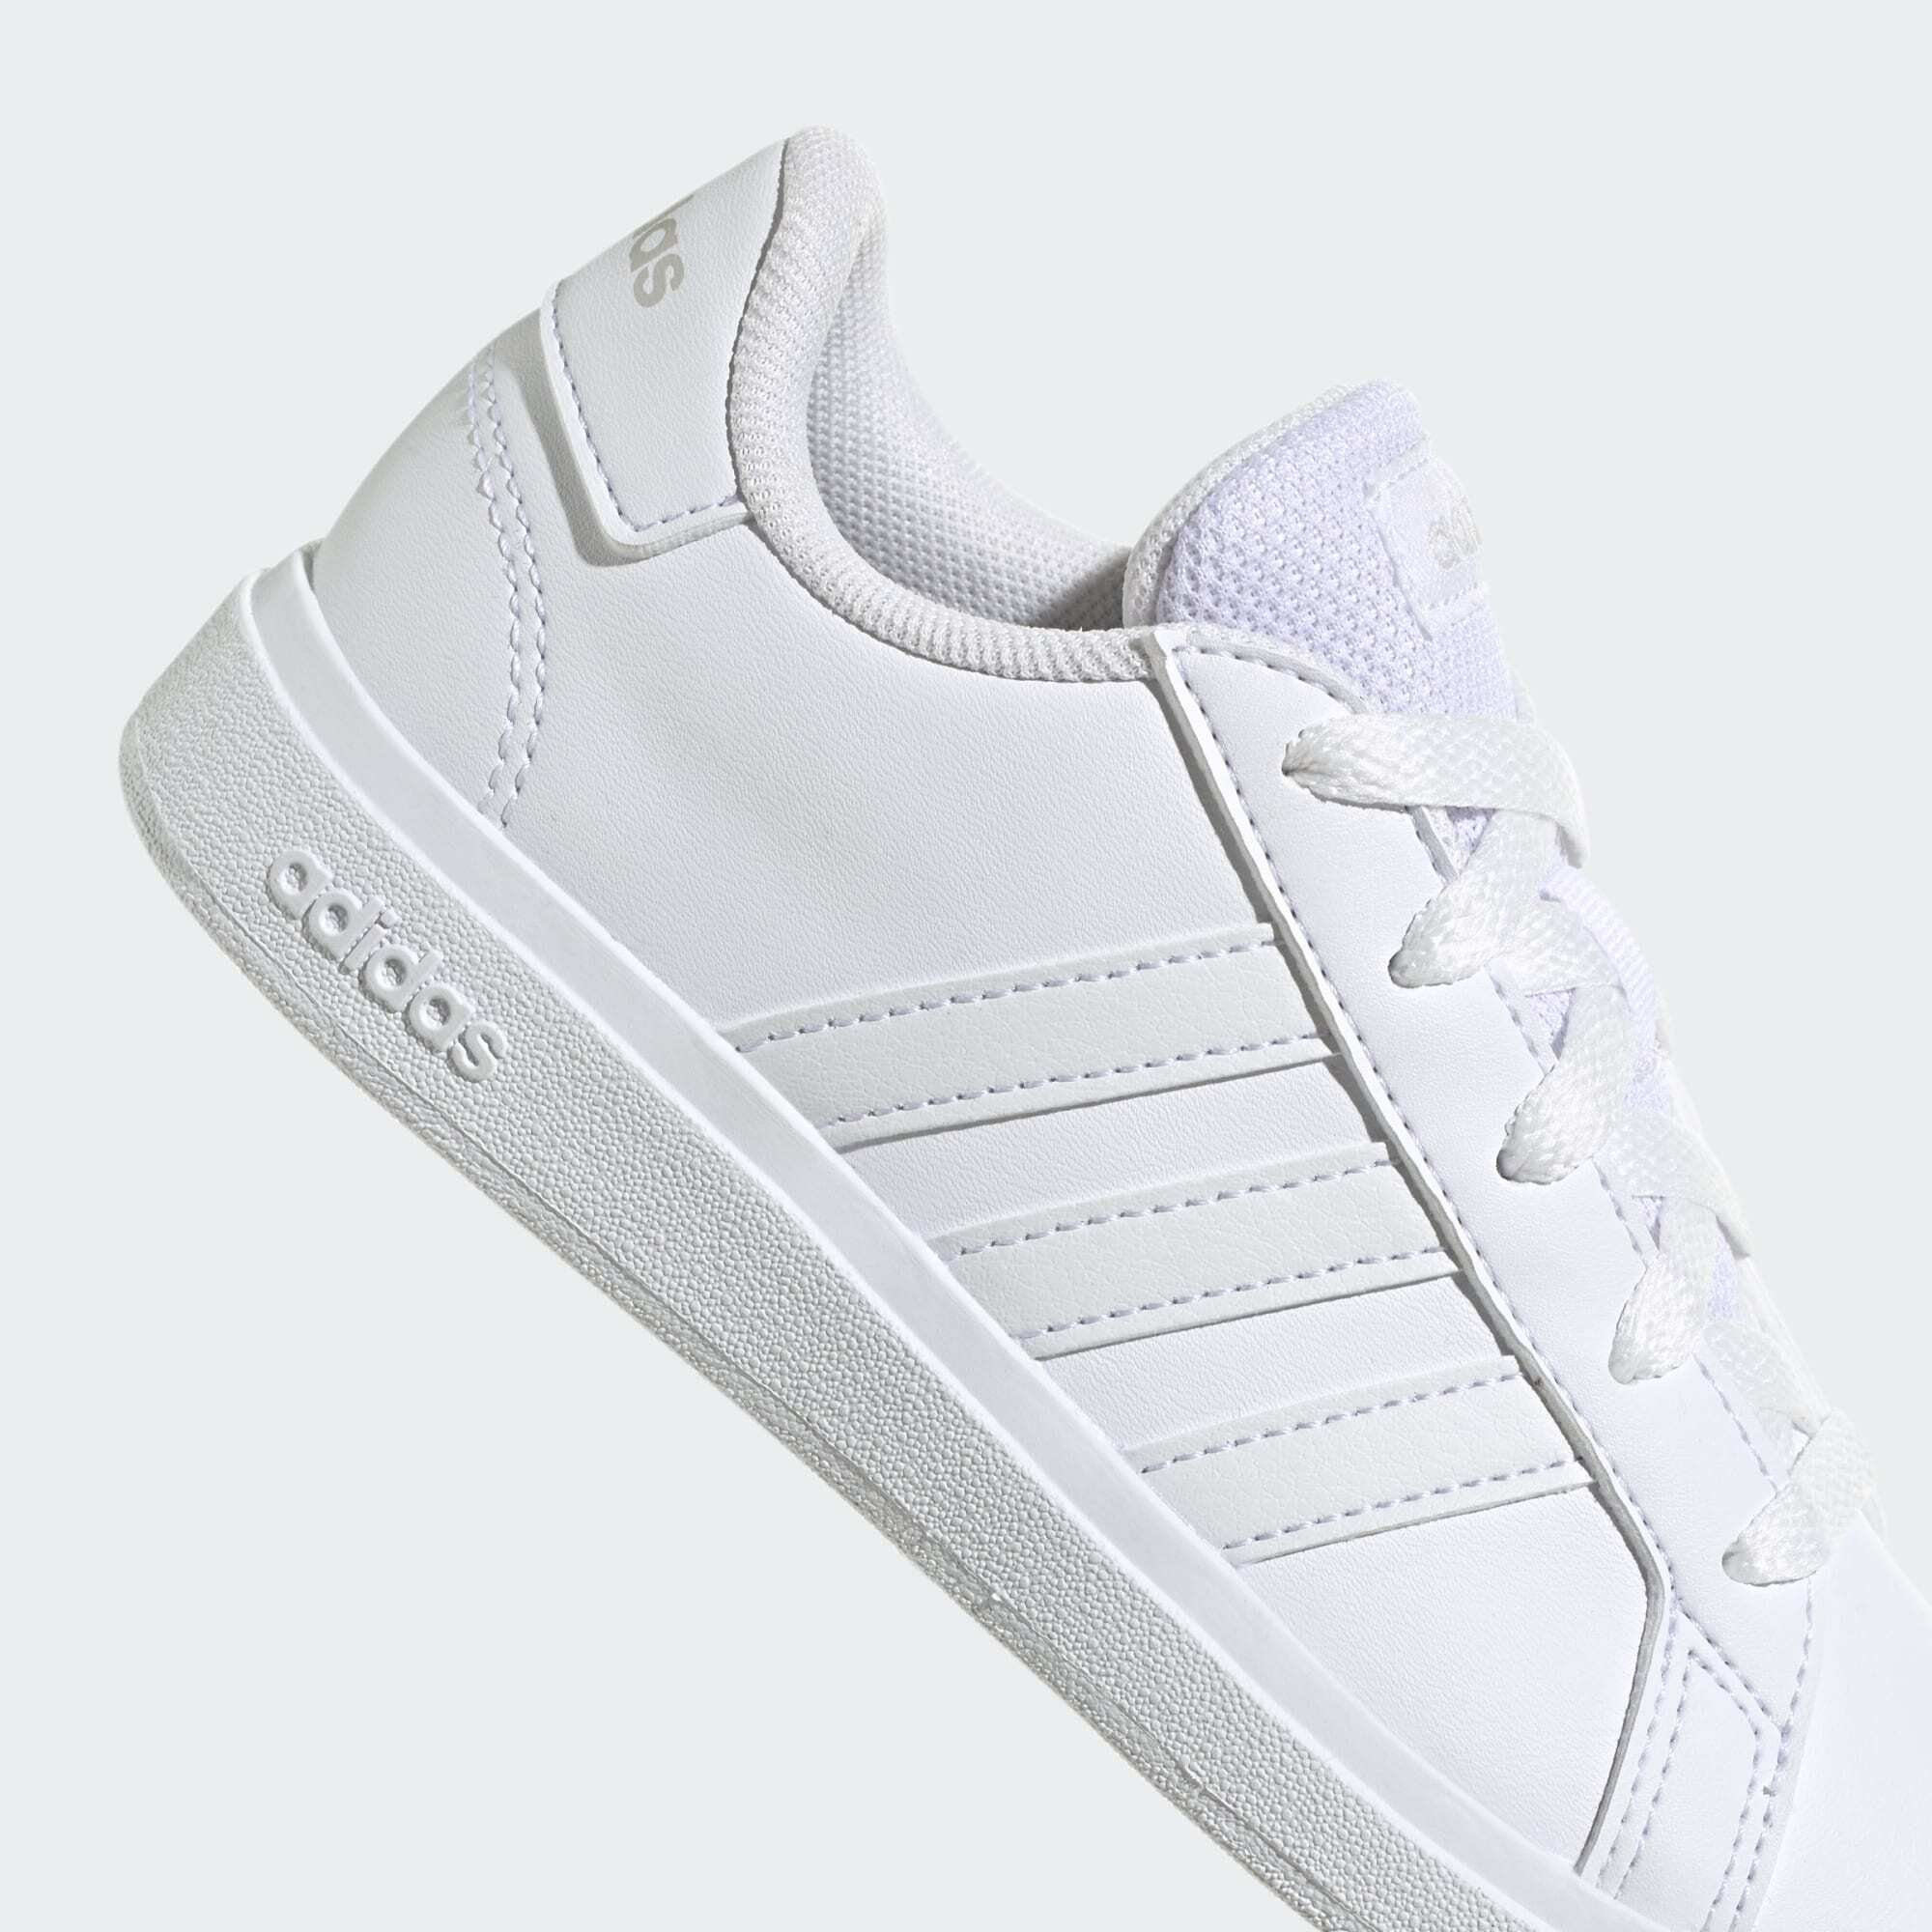 Cloud LIFESTYLE GRAND SCHUH adidas Cloud White COURT / Grey TENNIS Sportswear LACE-UP One Sneaker / White